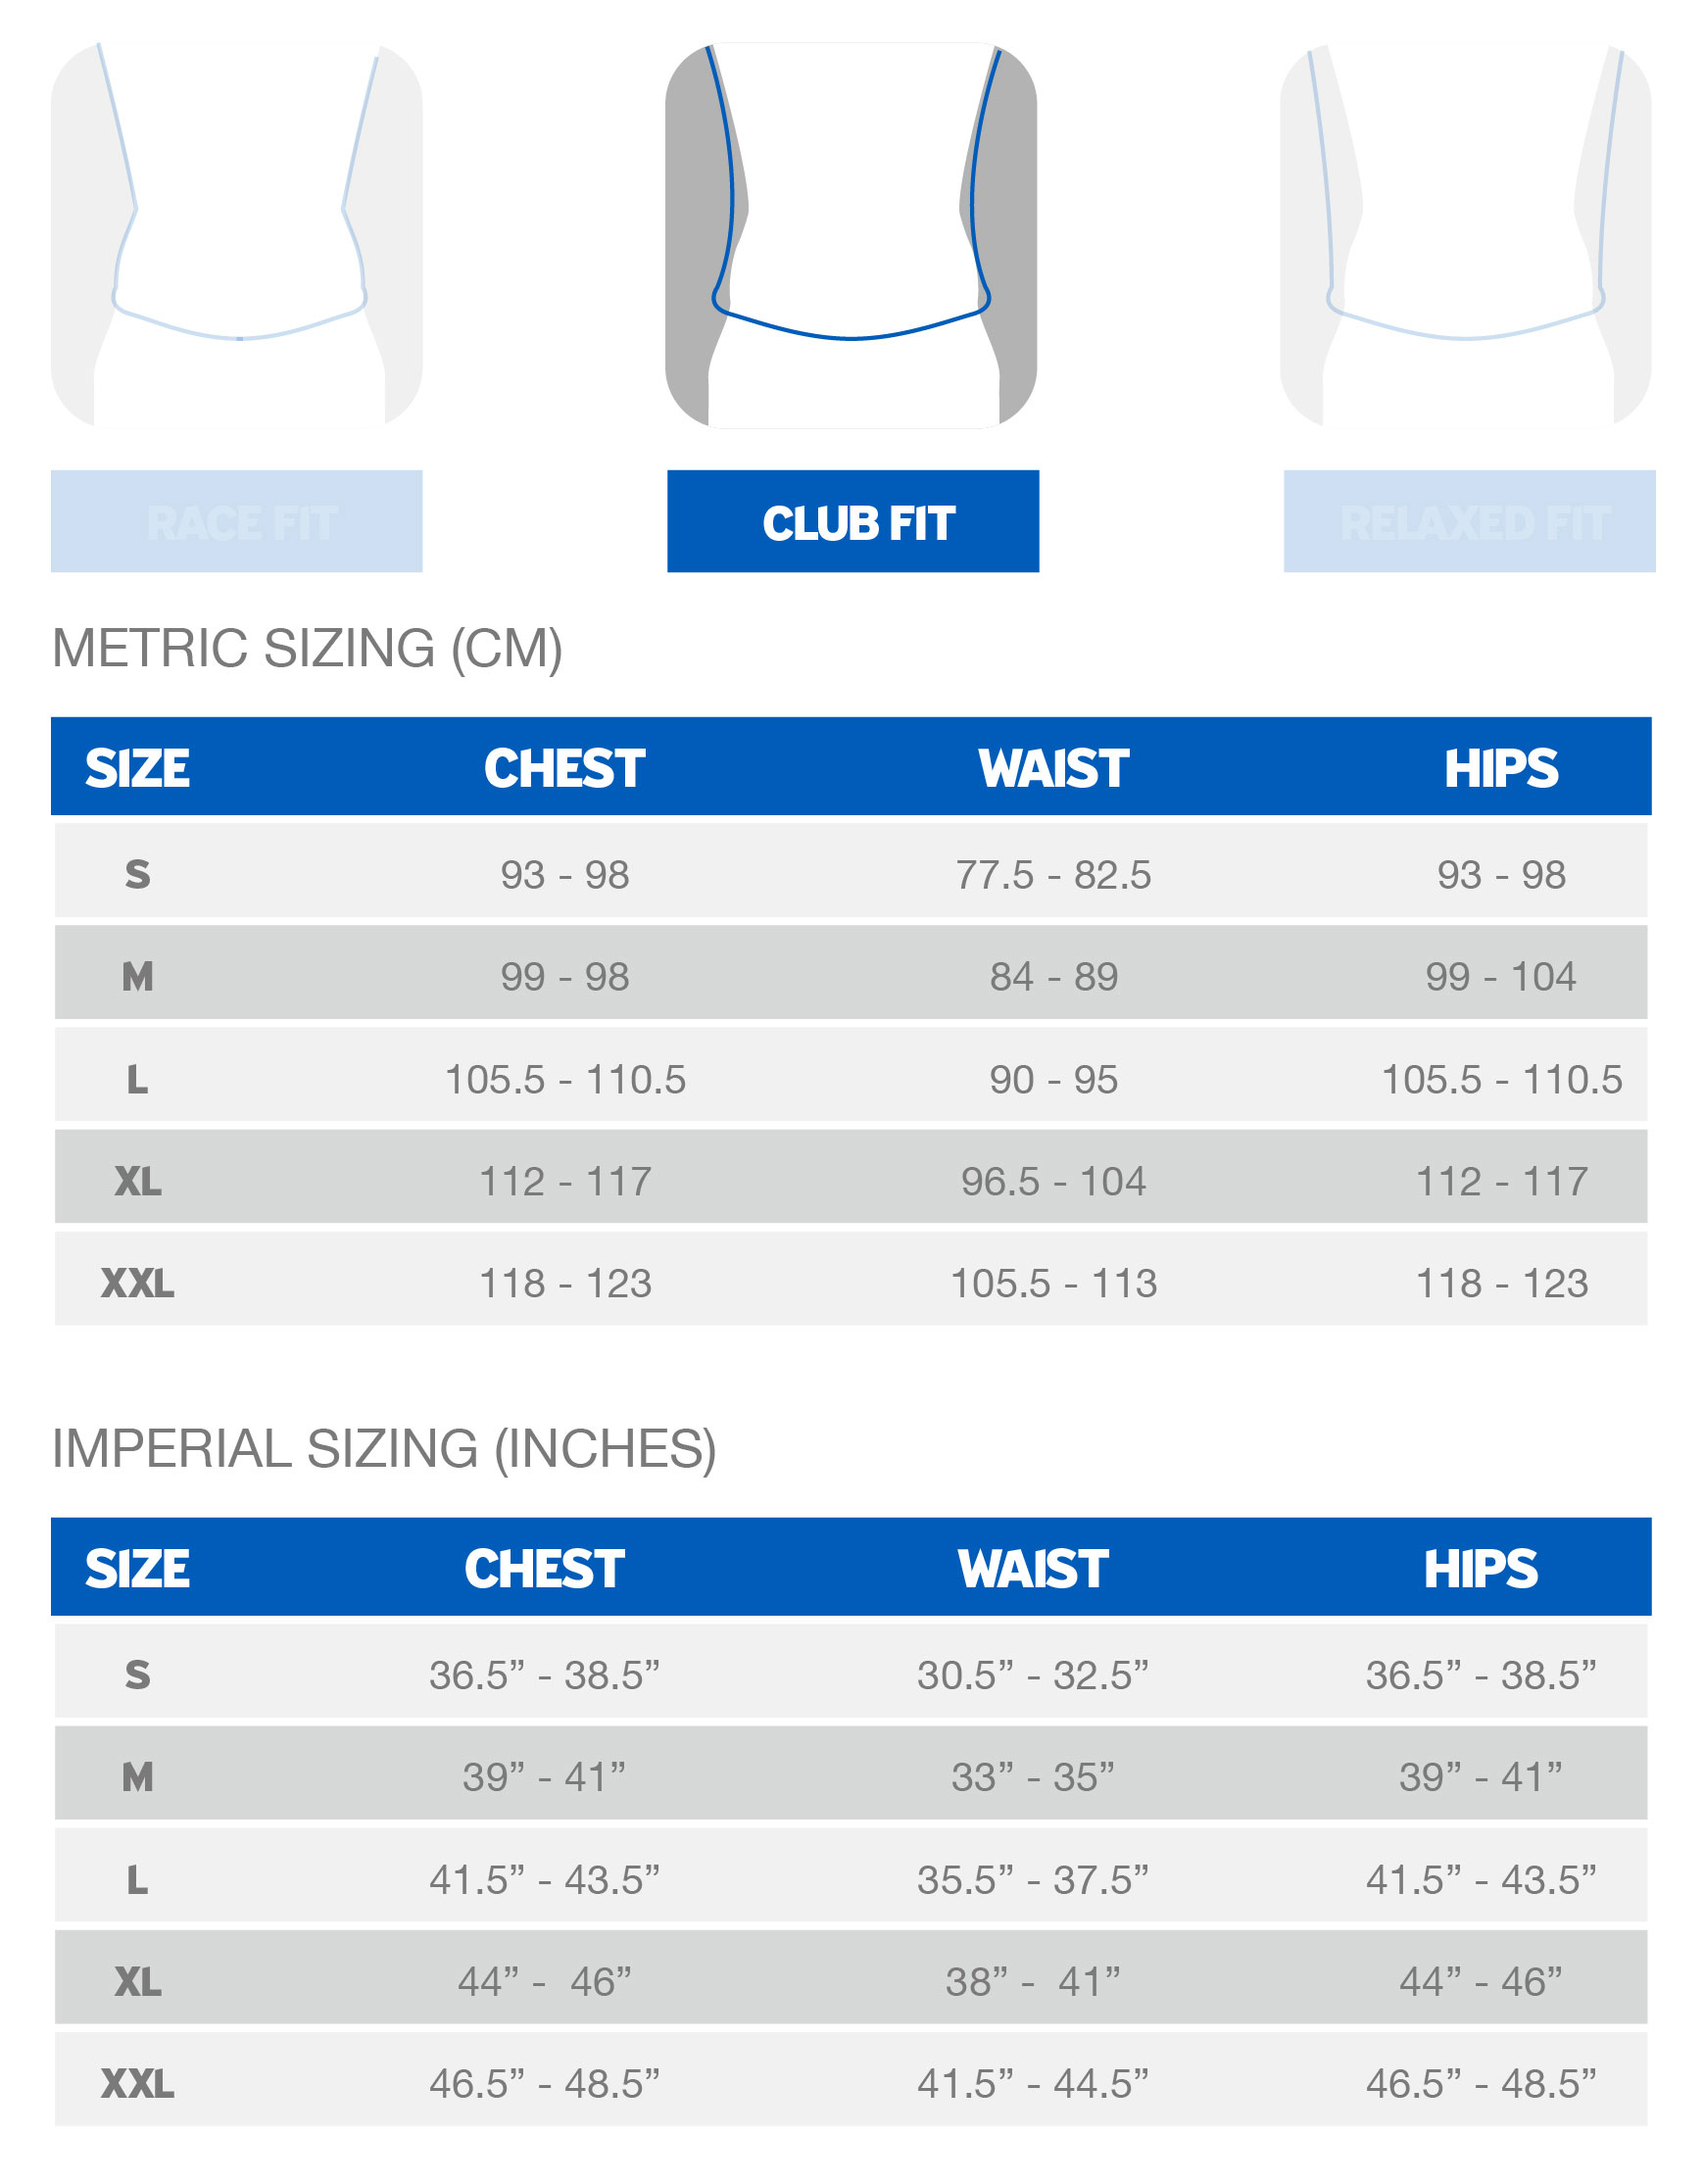 Giant Men's Club Fit sizing chart